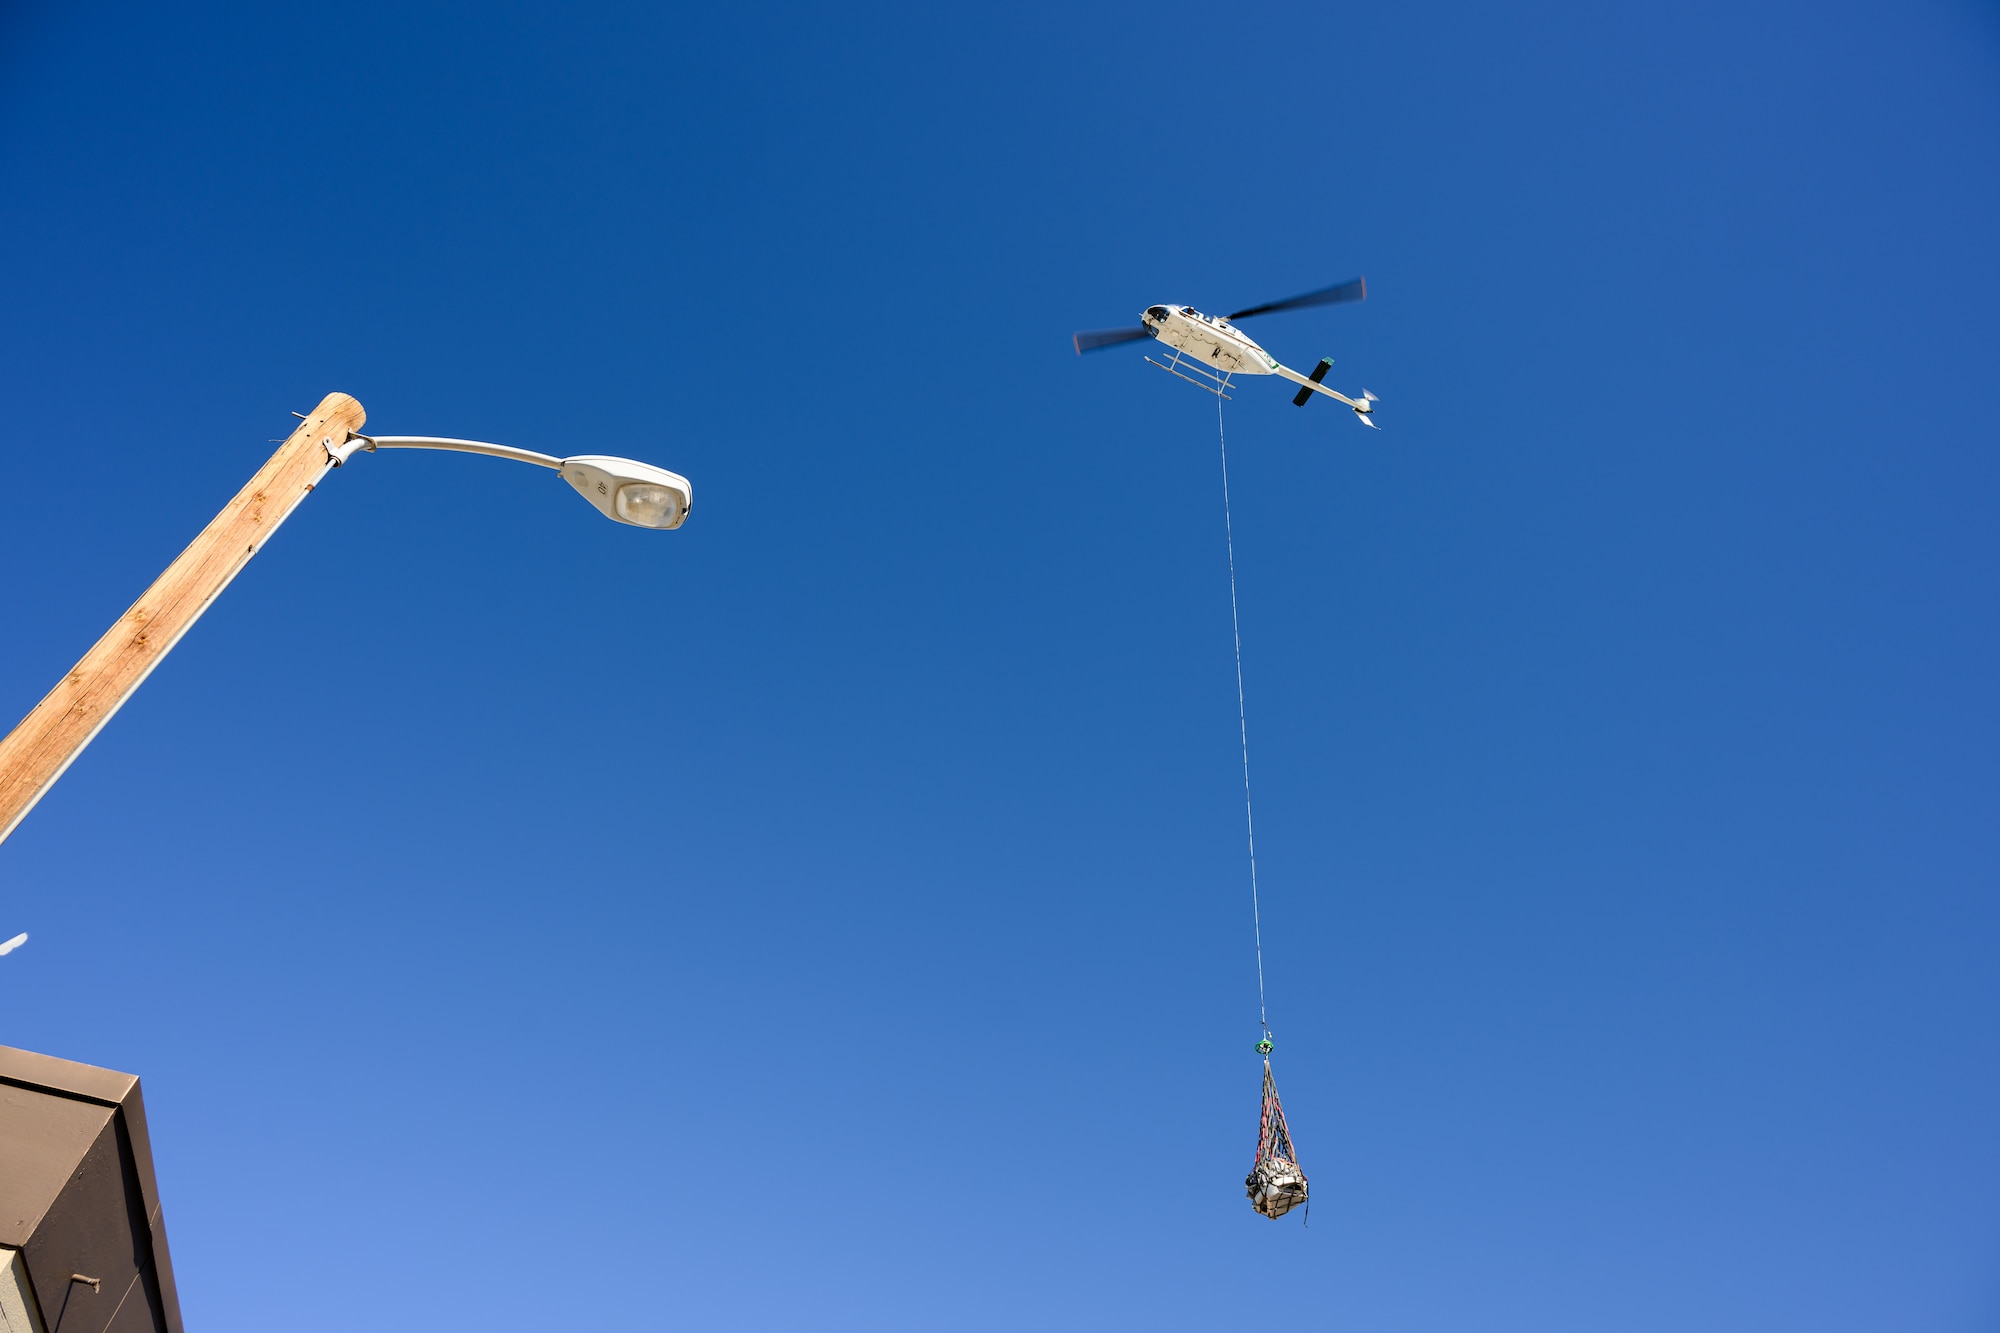 A photo of a capsule being lowered to the ground in a helicopter sling